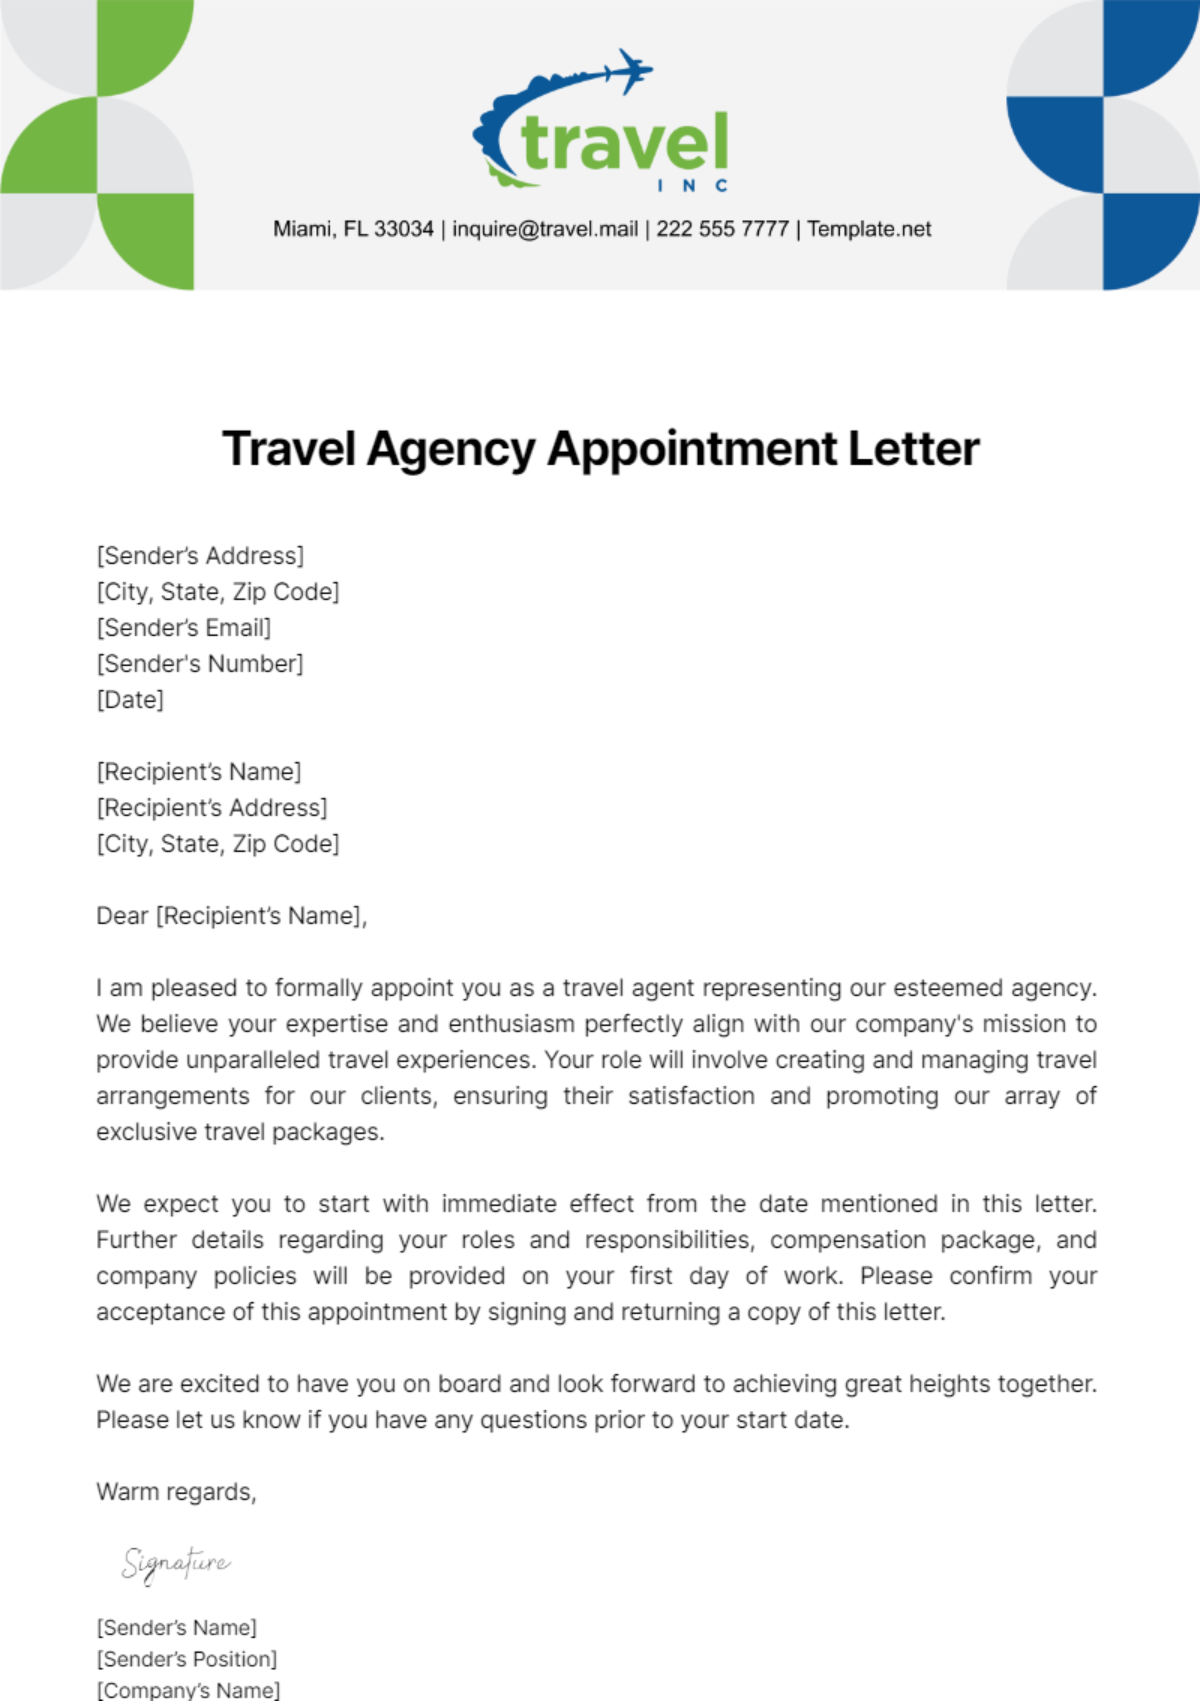 Travel Agency Appointment Letter Template